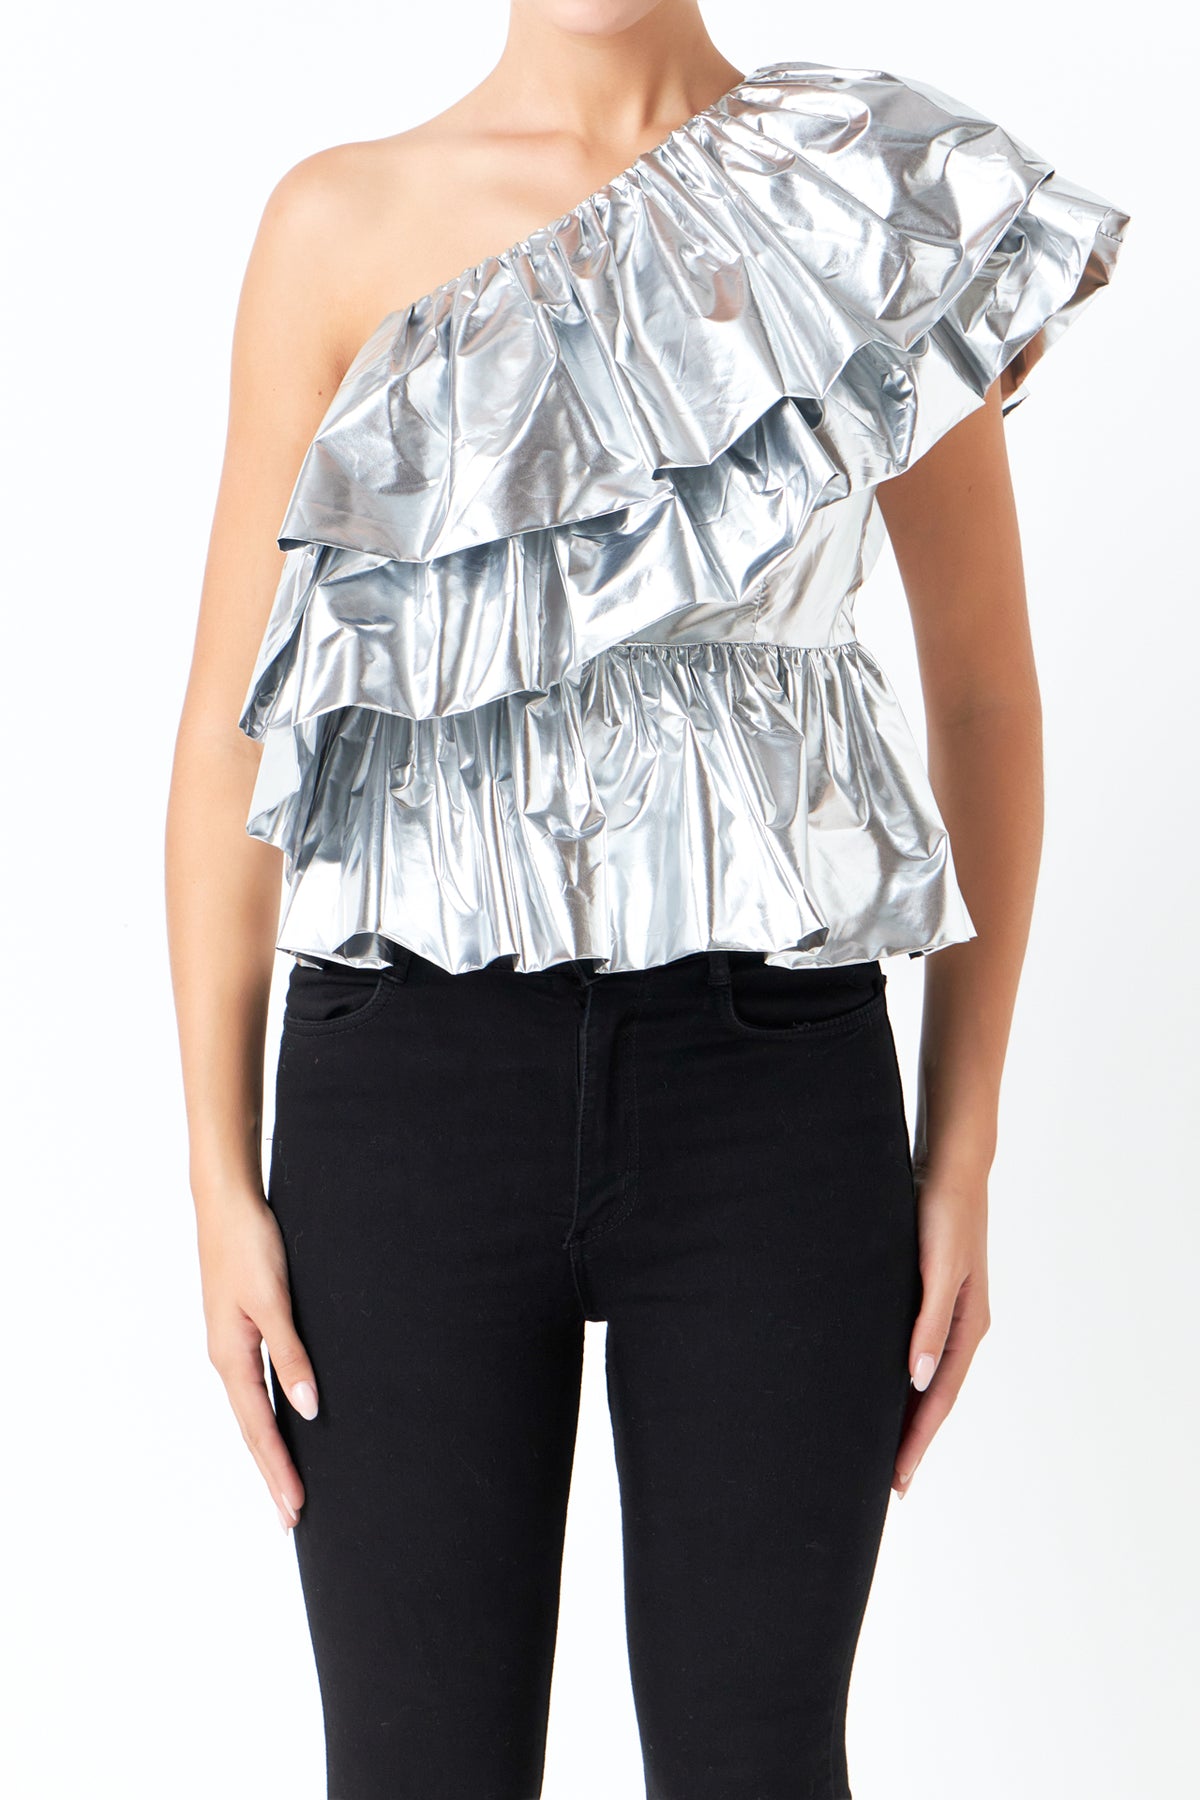 ENDLESS ROSE - Metallic Tiered Top - TOPS available at Objectrare